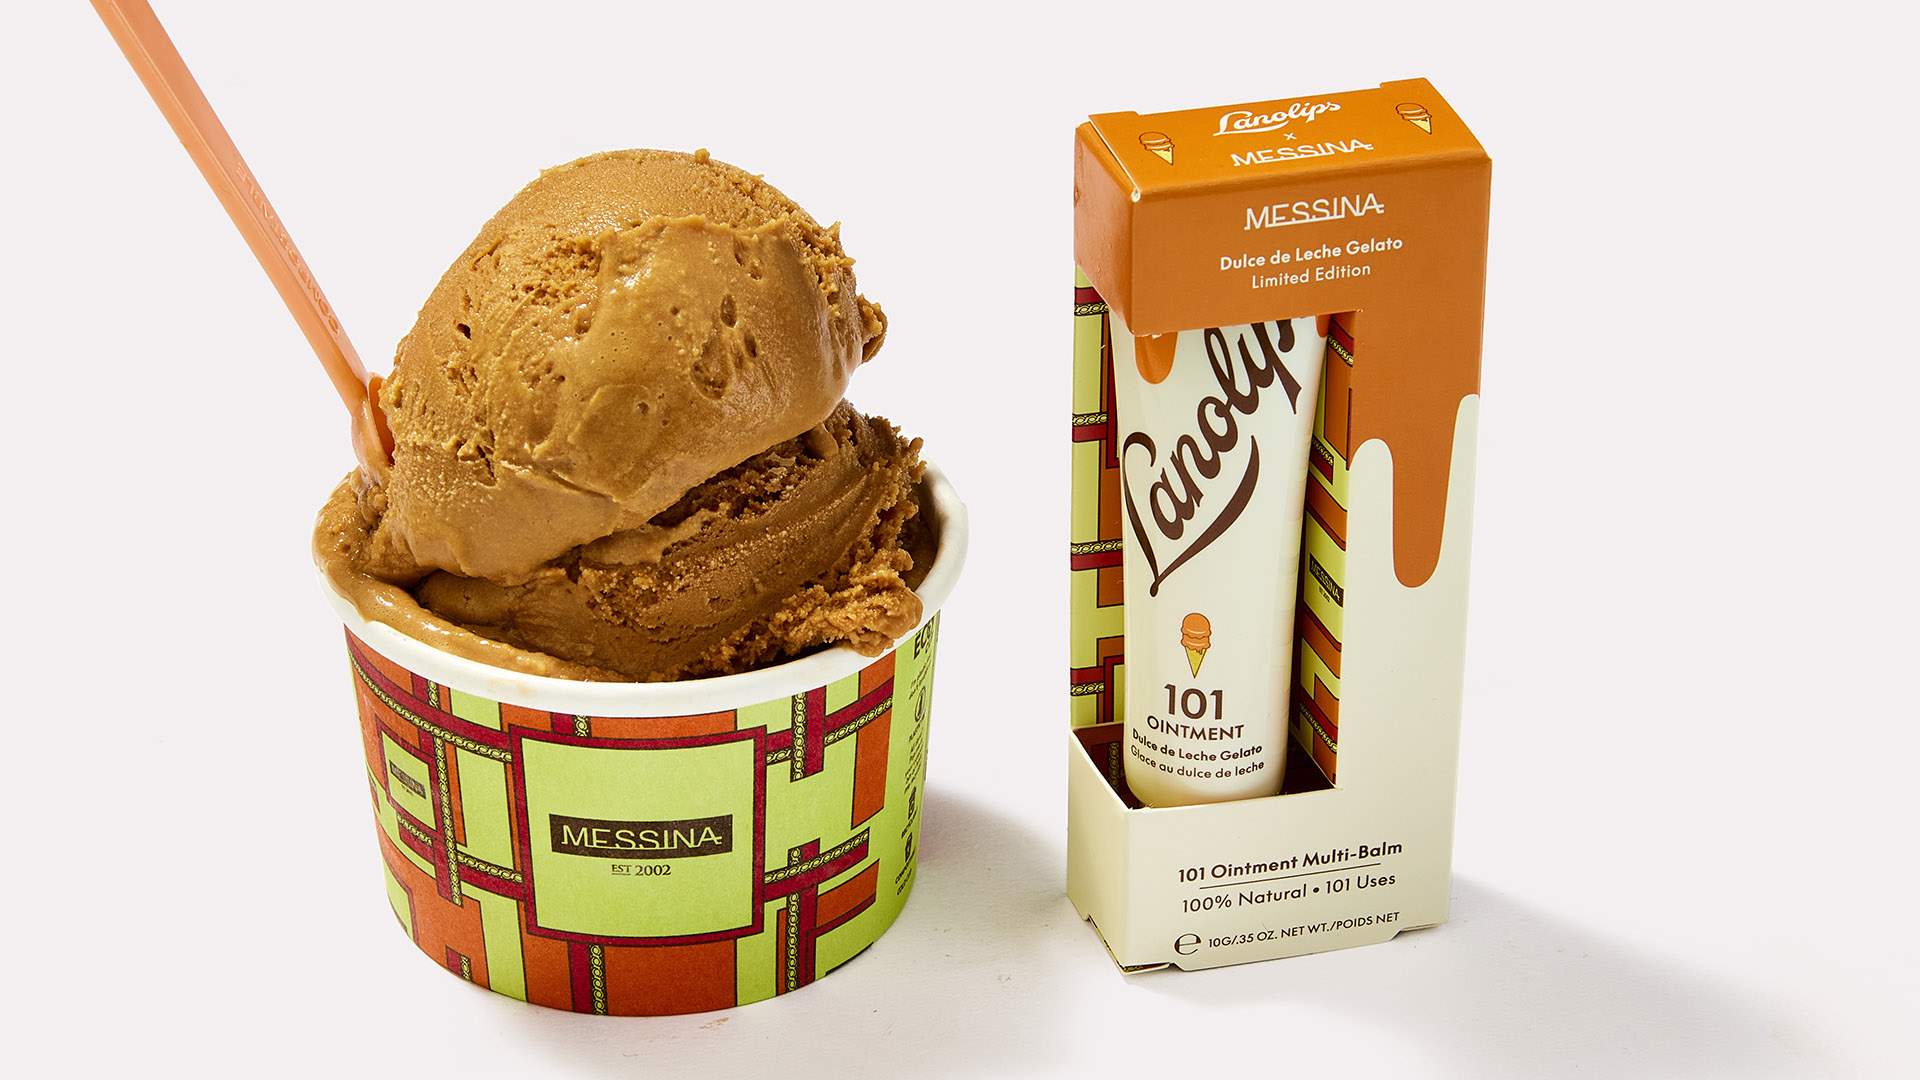 Messina and Lanolips Have Added a New Dulce de Leche Gelato Balm to Their Dessert-Flavoured Range